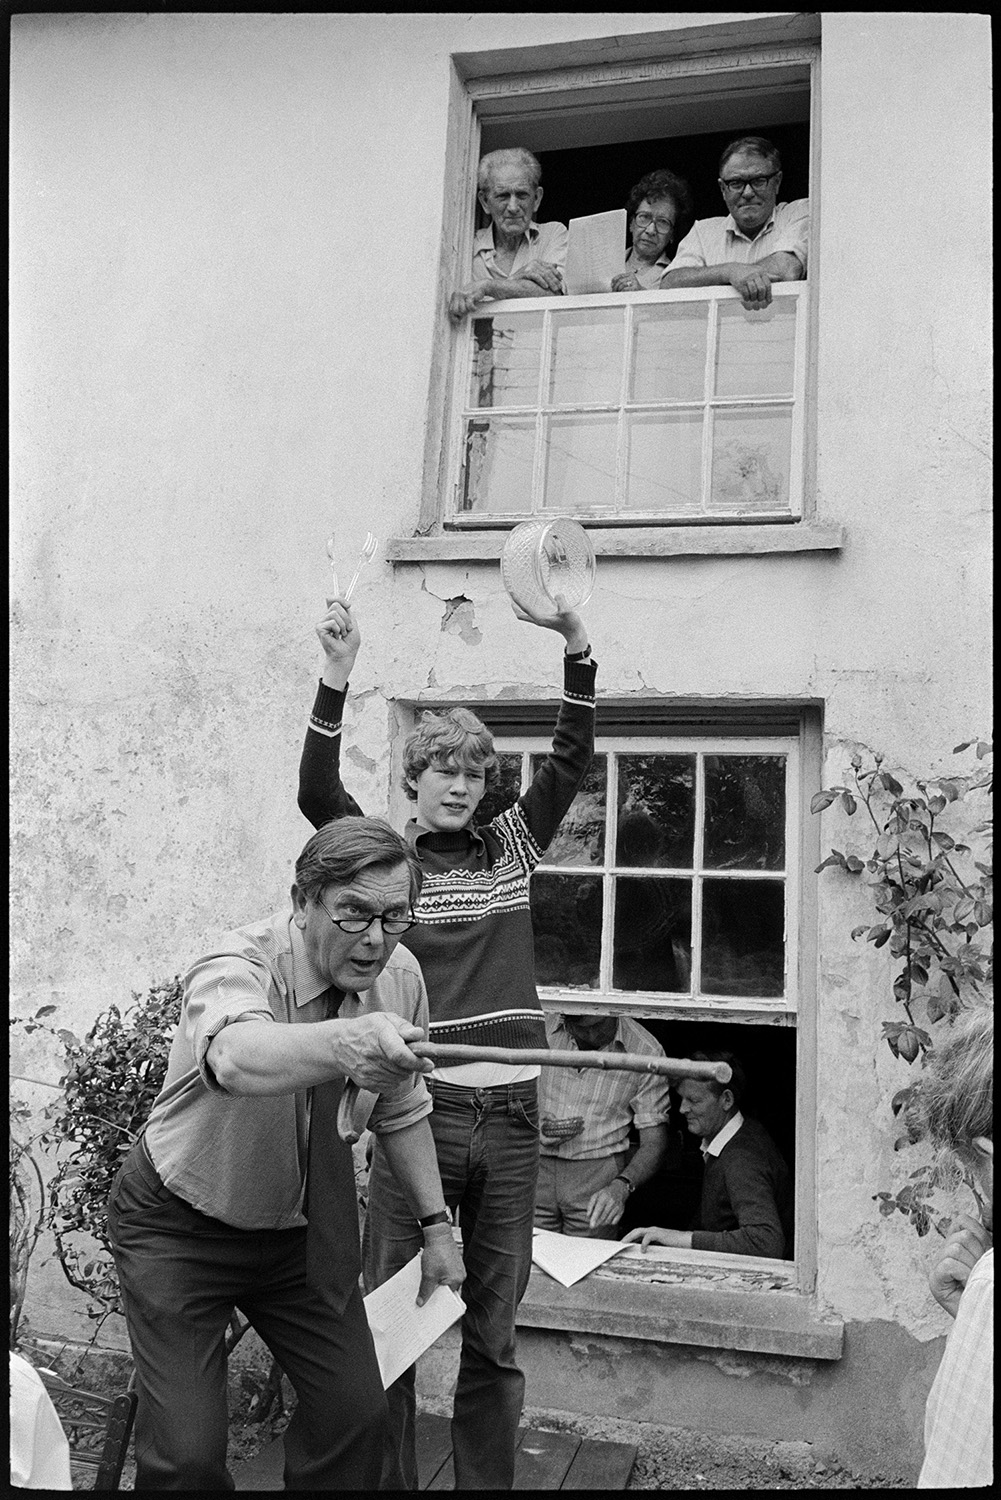 Auction of house contents, crowd, auctioneer and wife acting as clerk. 
[Paul Foggo auctioning the contents of Arscotts House in Dolton. He is using a walking stick to point to bidders and a boy is holding up the items for sale behind him. People are watching the auction from the windows of the house.]